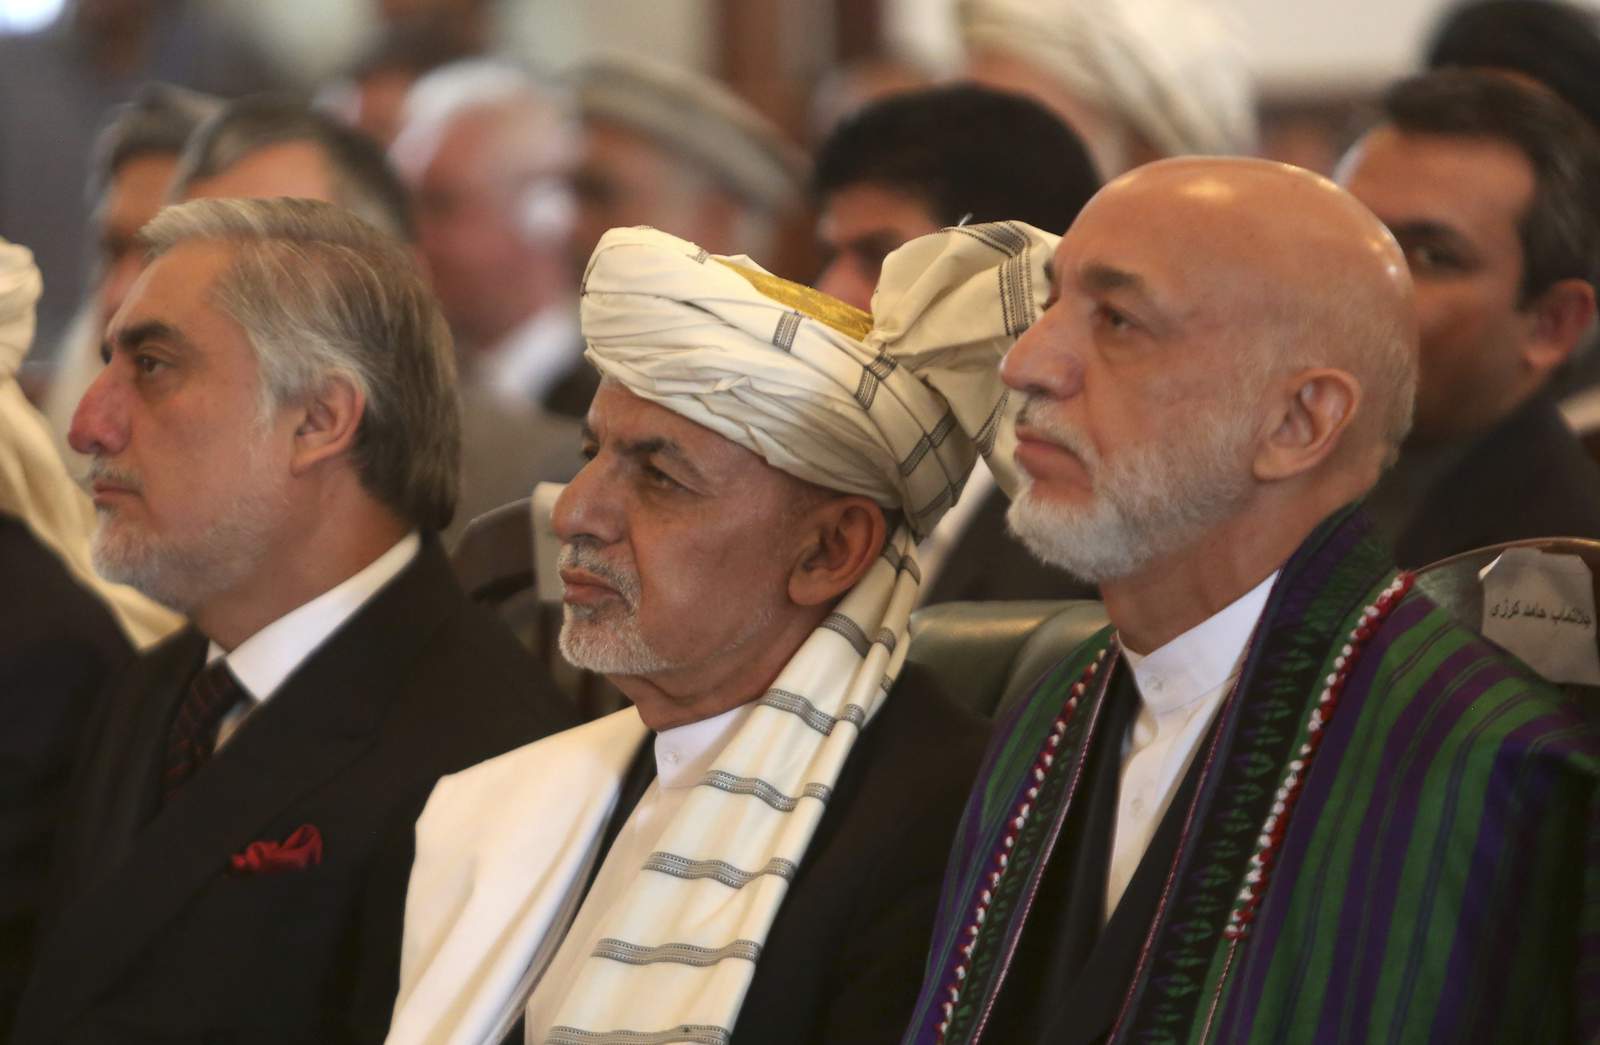 Efforts ramping up to get intra-Afghan peace talks started